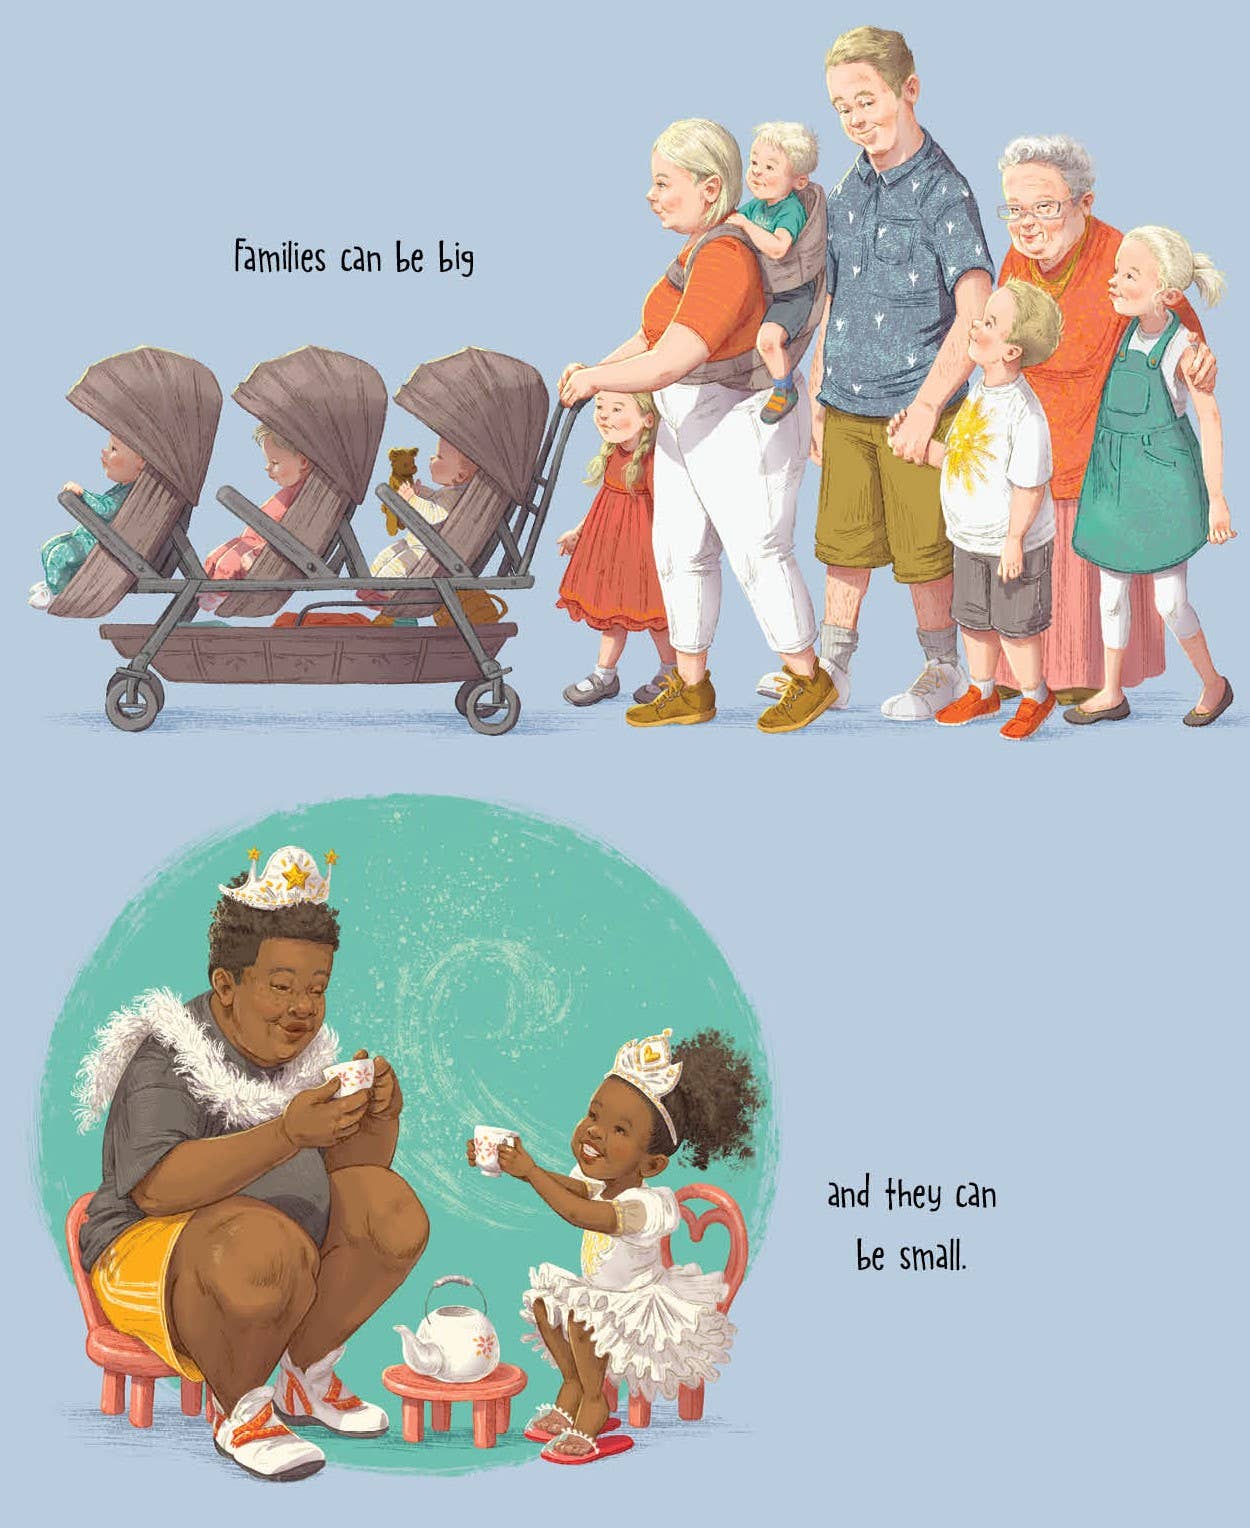 A Family Like Ours: Children's picture book